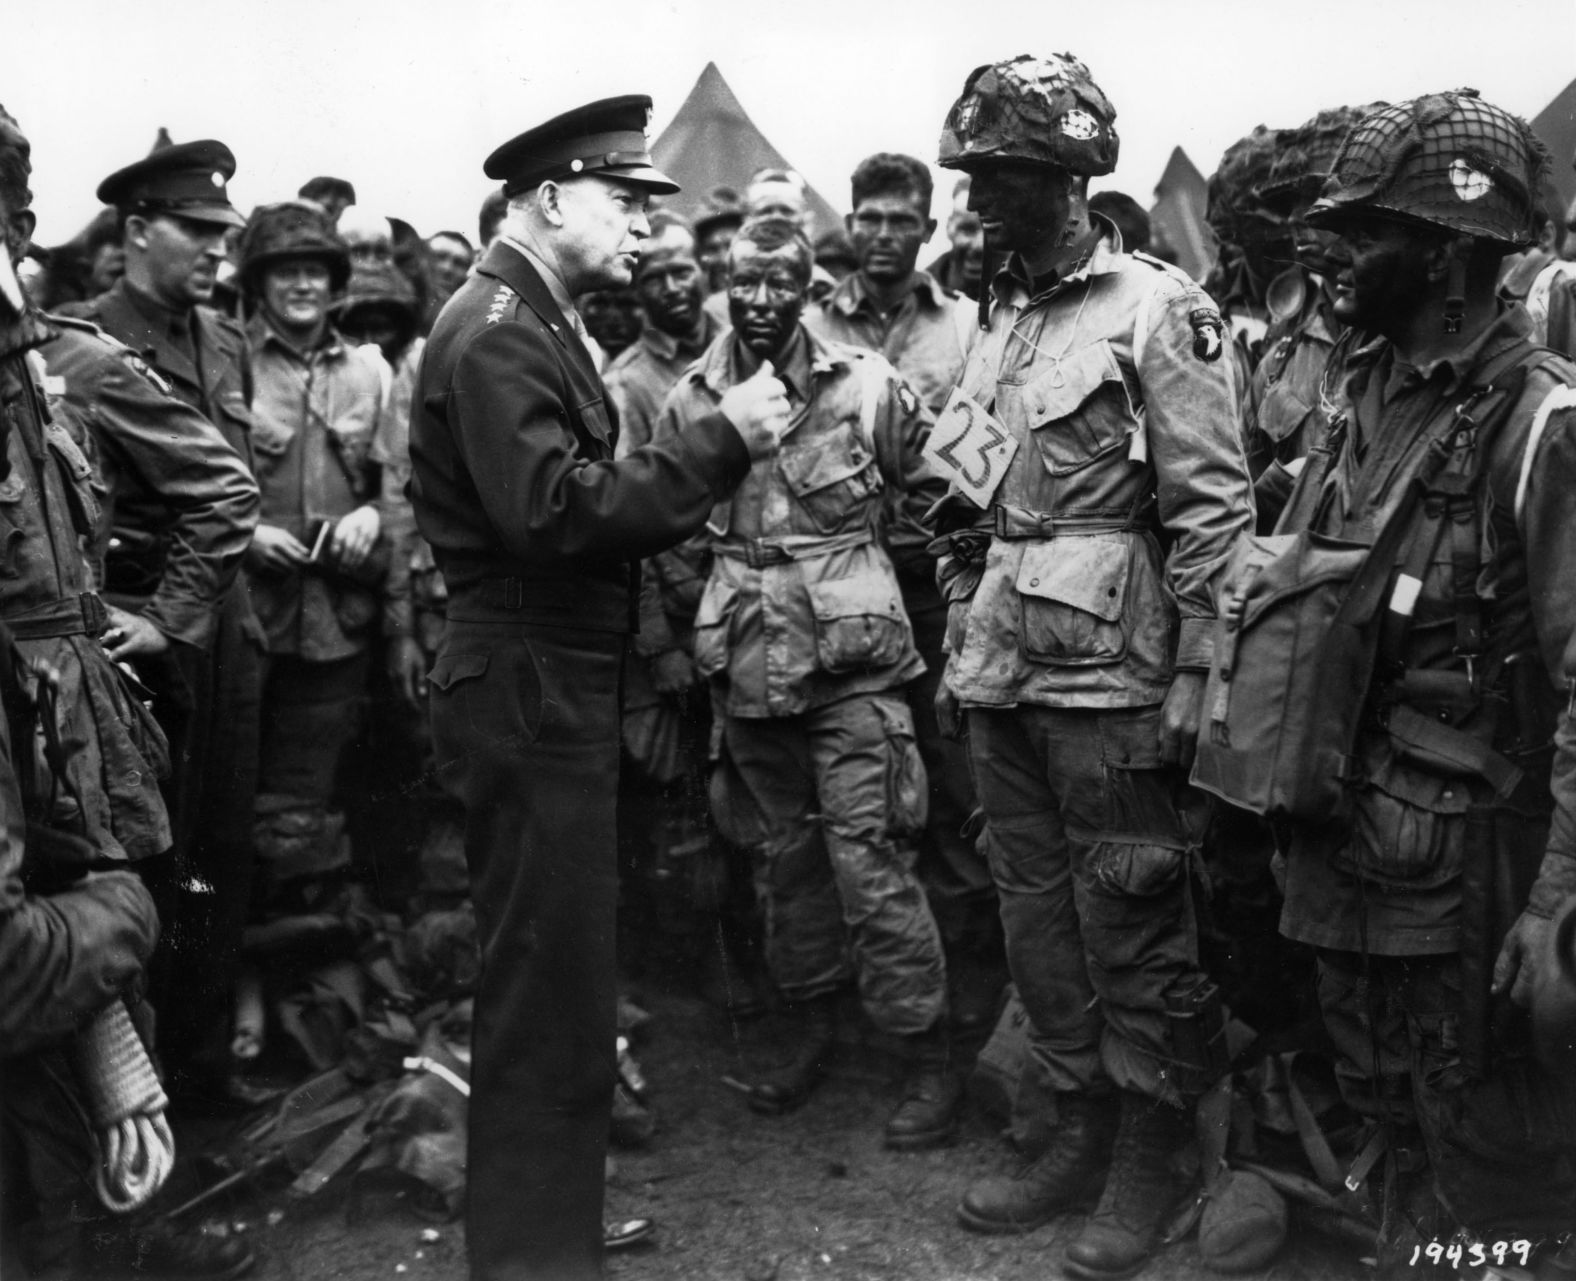 Eisenhower, supreme commander of the Allied forces, gives the order of the day to paratroopers in England. "Full victory — nothing else" was the command just before they boarded their planes to participate in the first wave.